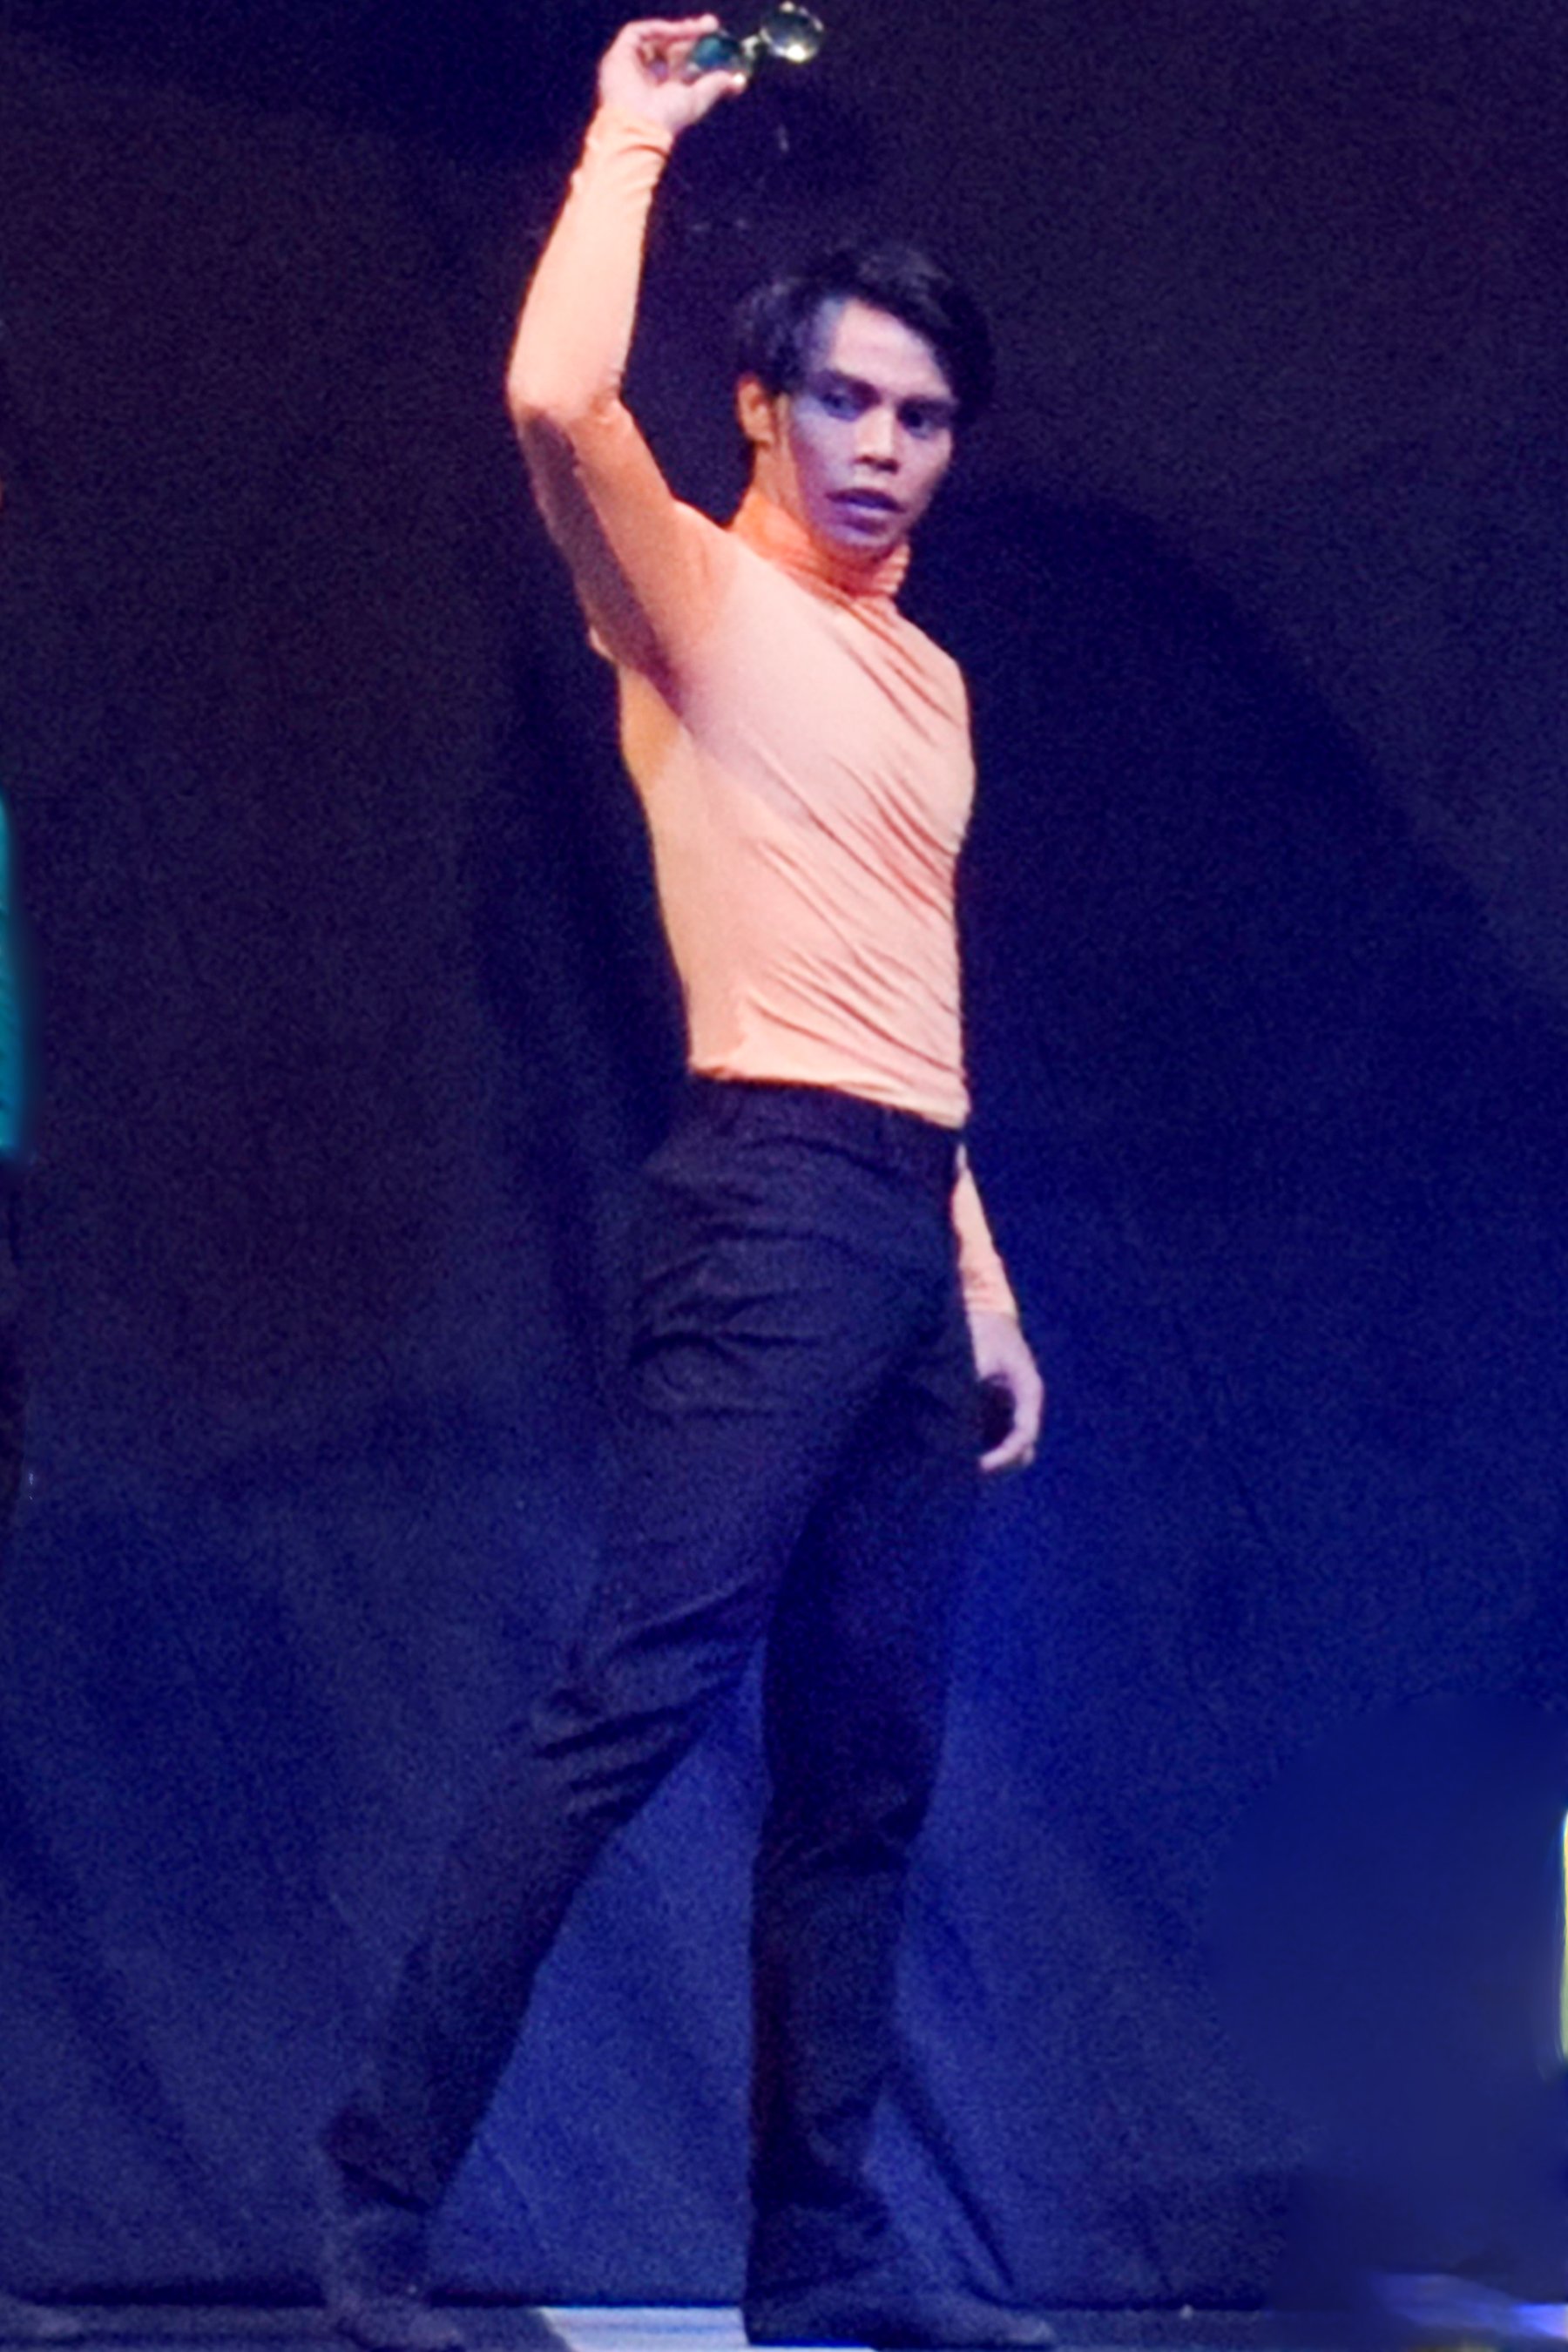    John Balagot channels a groovy vibe in this orange turtleneck top and those shades he has just taken off in keeping with the music used in  The Winding Road . Choreographed by Martin Lawrance to a medley of songs by The Beatles, the work premiered